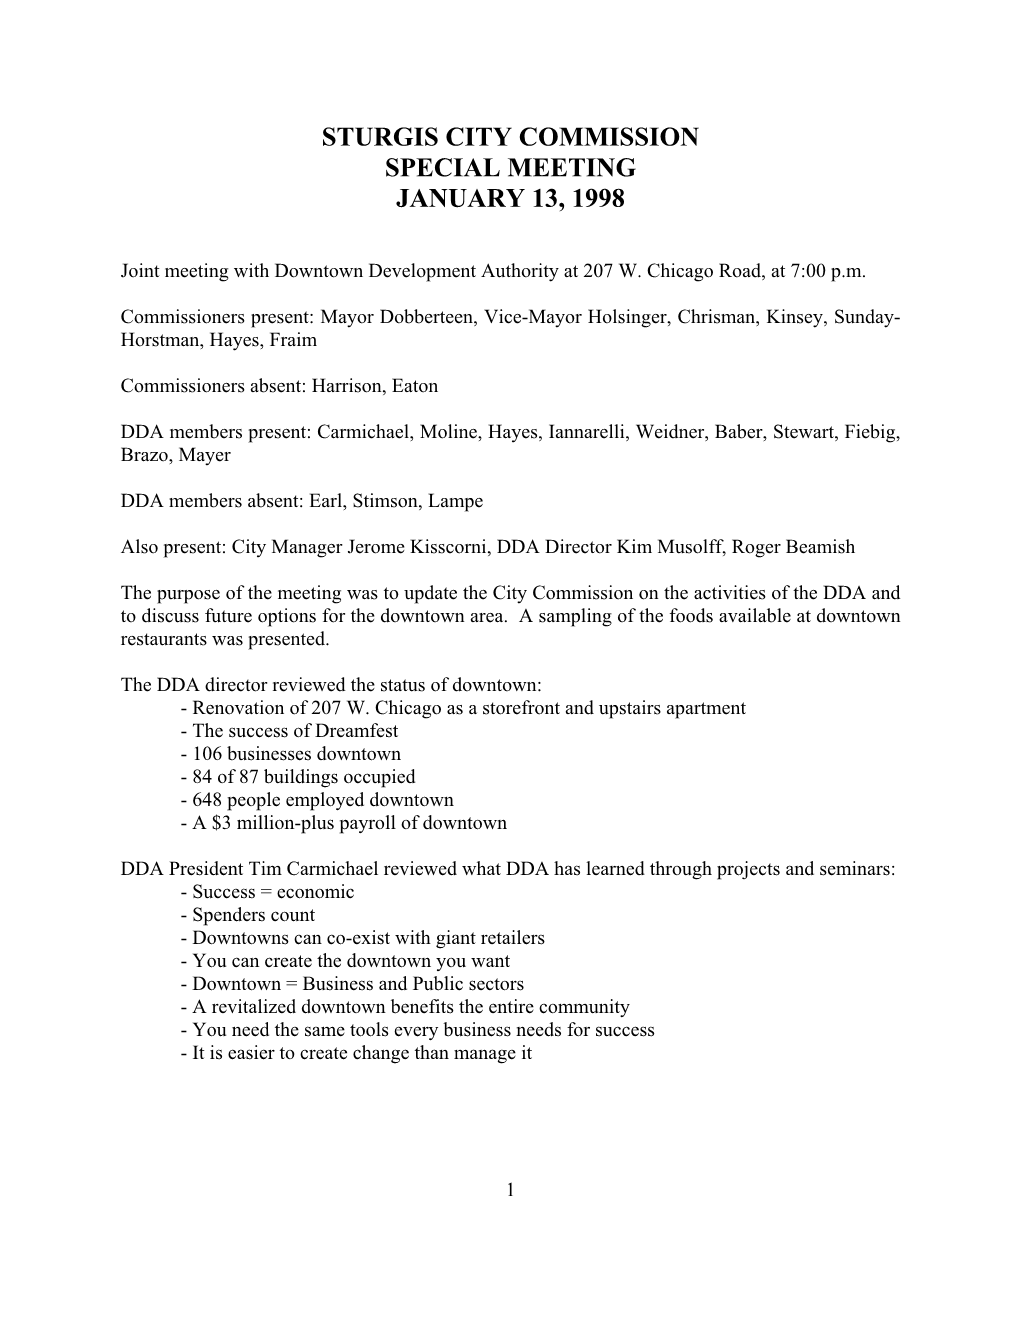 Sturgis City Commission Special Meeting January 13, 1998